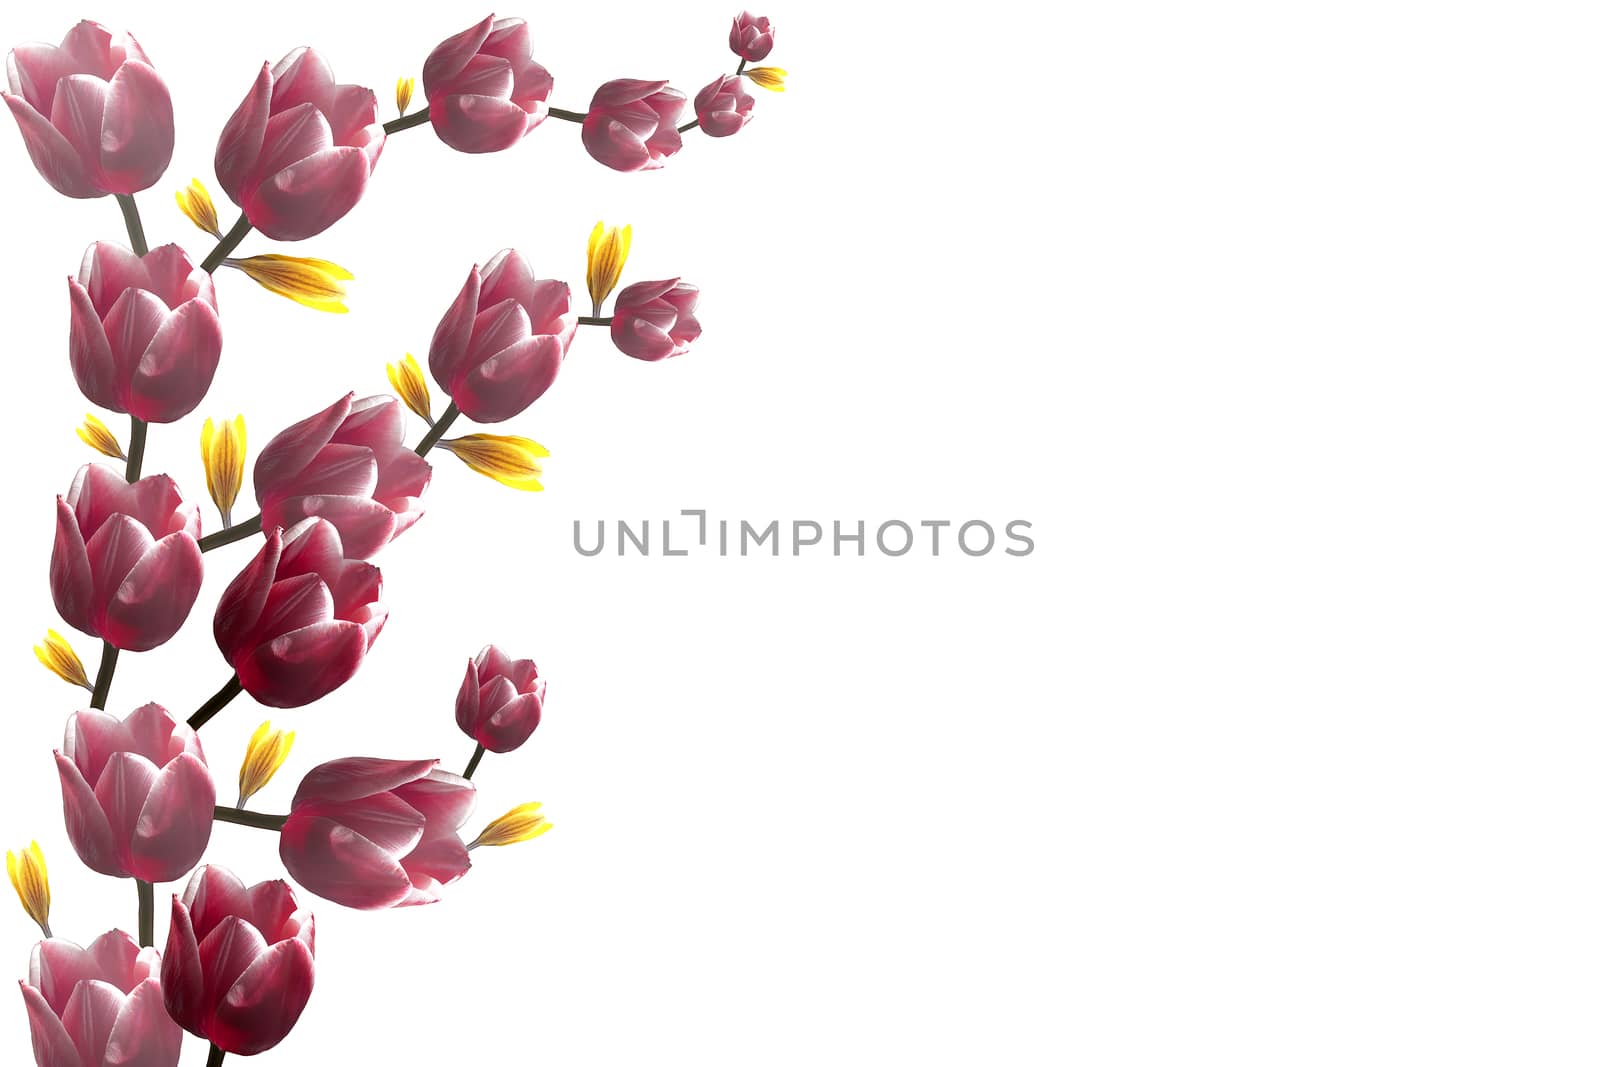 Decorative element in the form of a montage of tulips in red and yellow on a white background